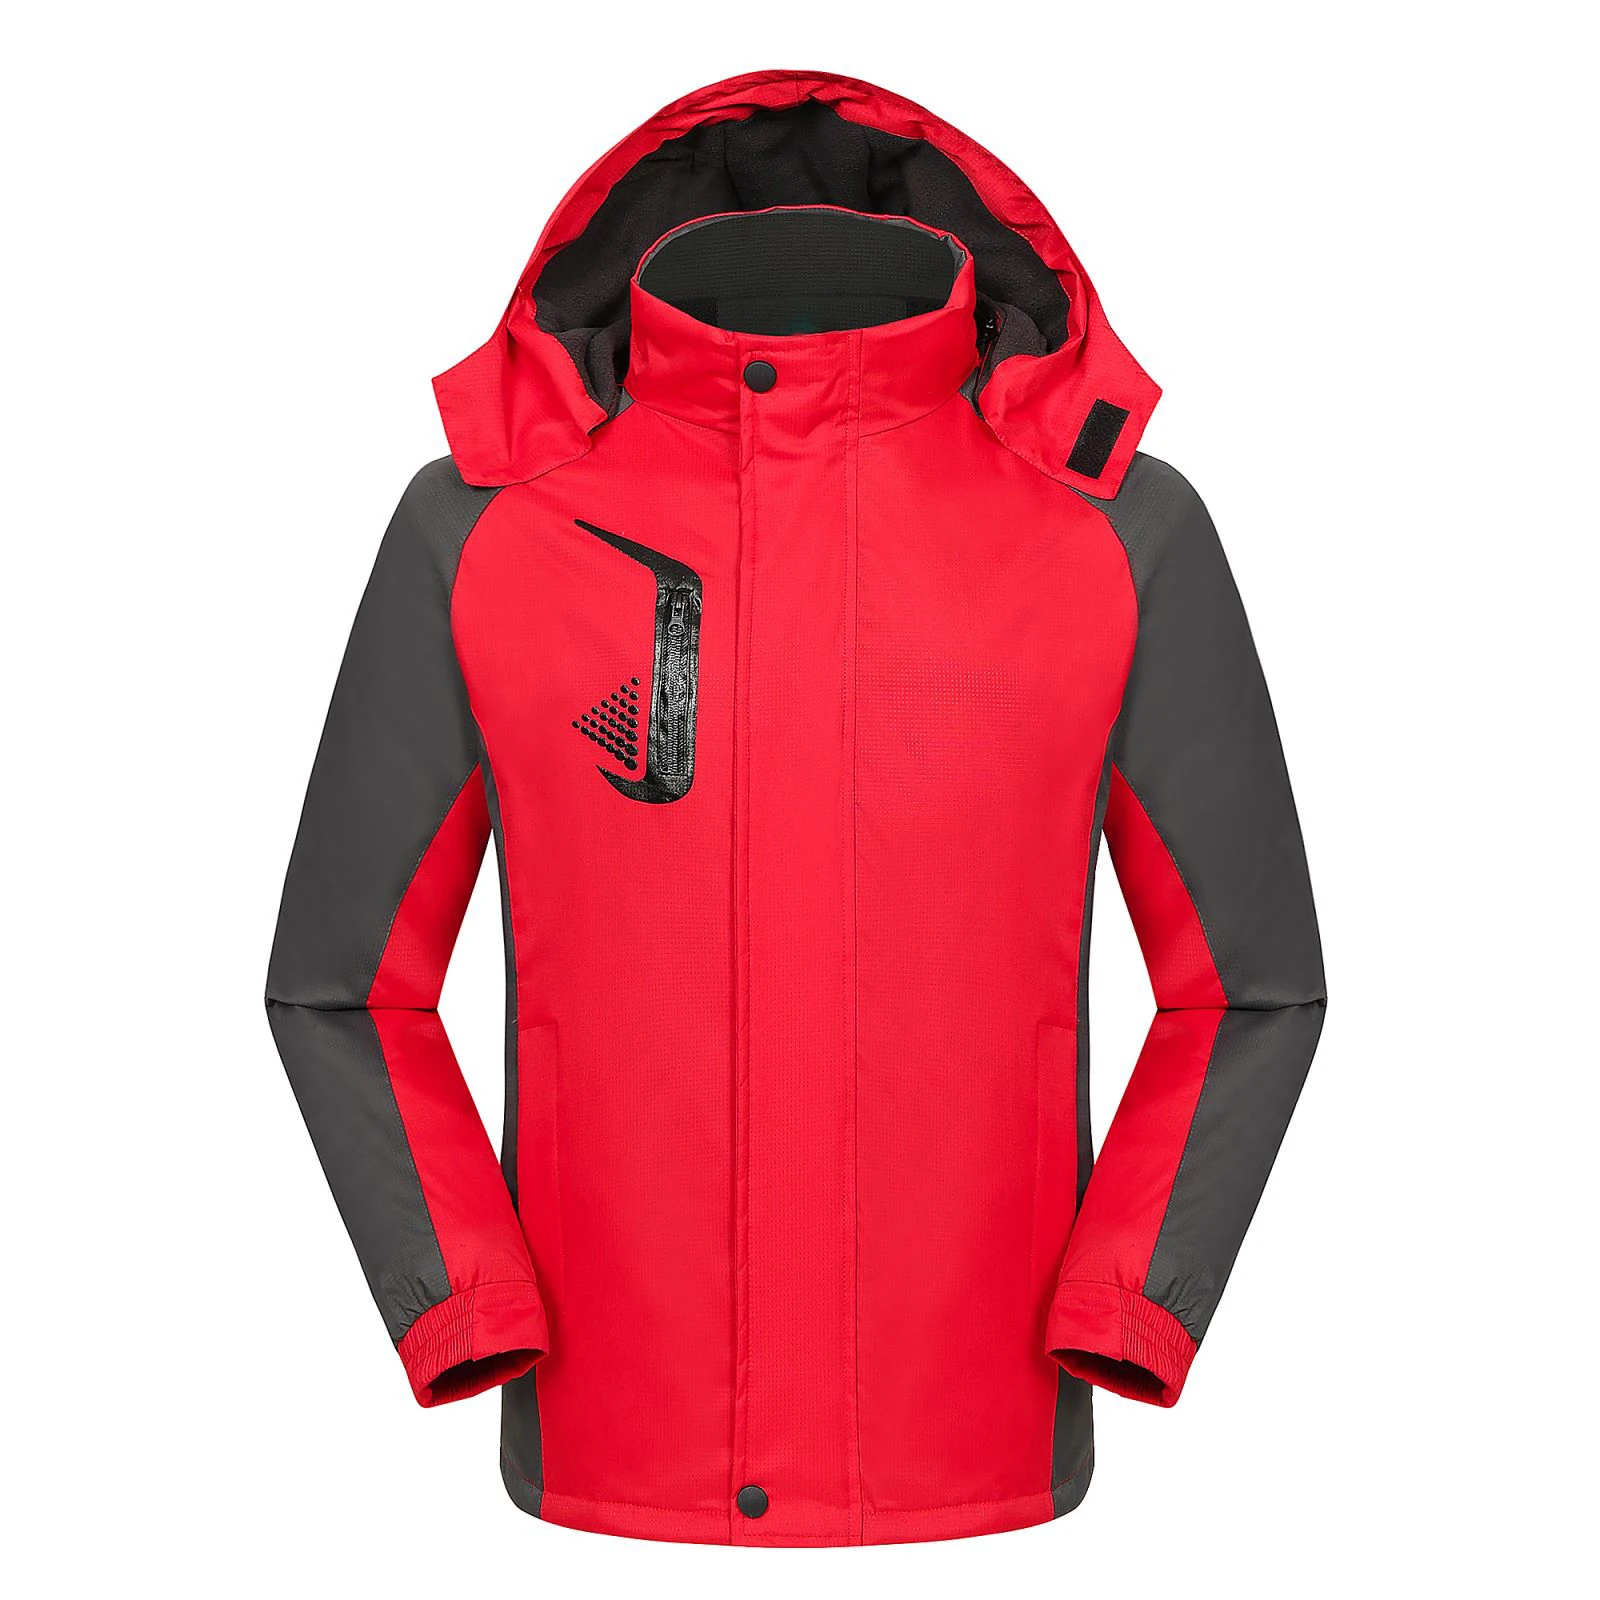 Men's Thick Windproof Hooded Jacket 2